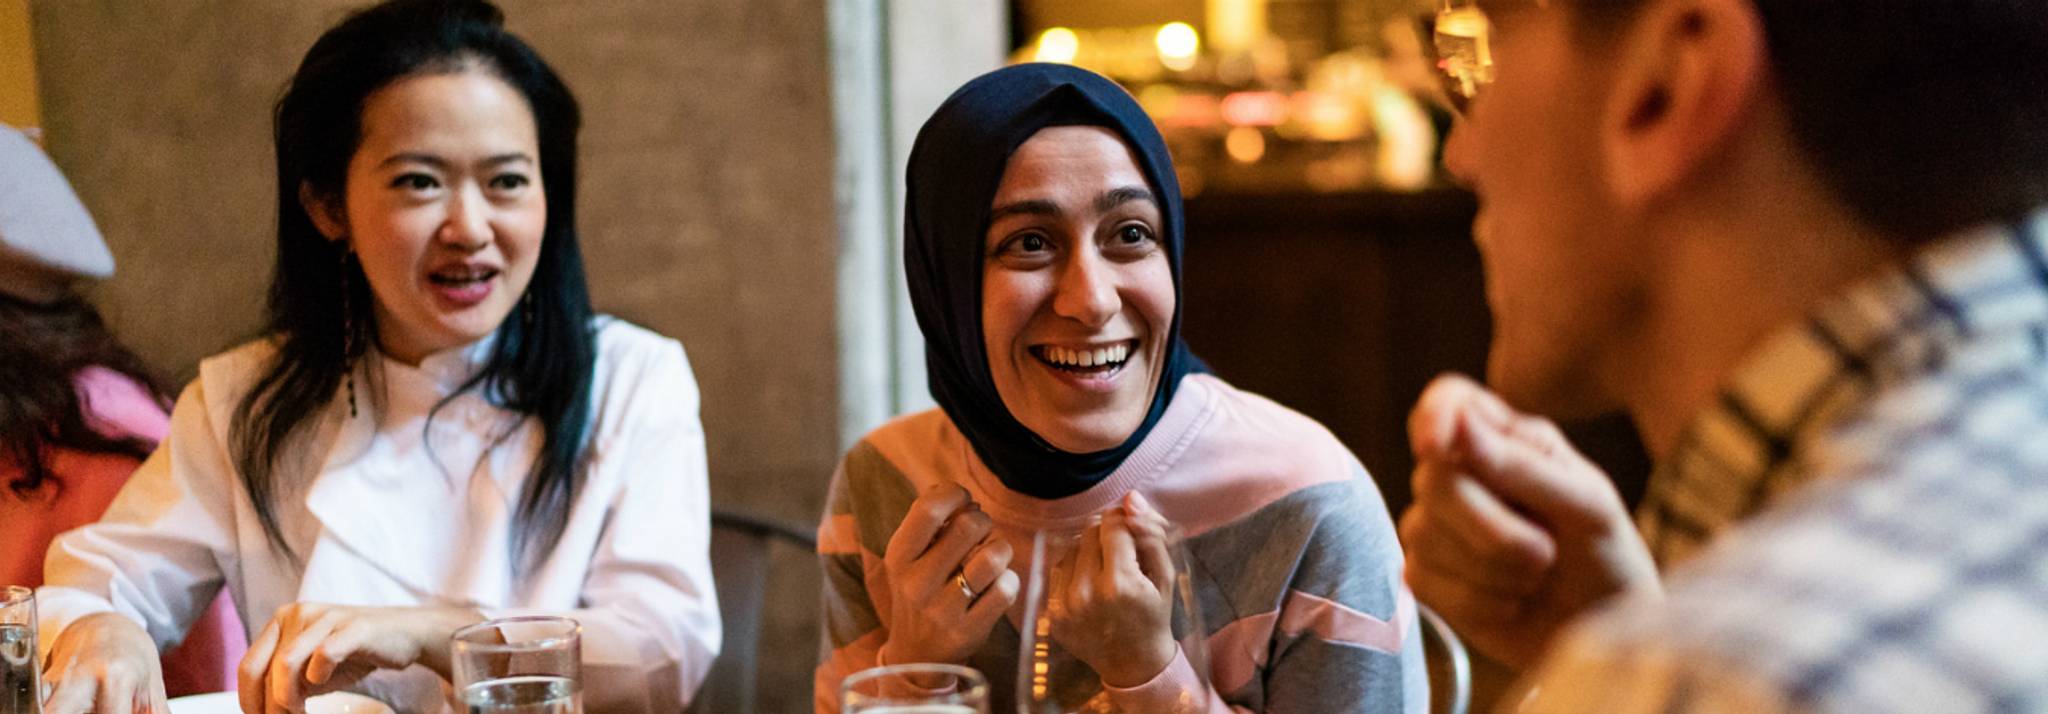 How women are taking over tech in the Middle East